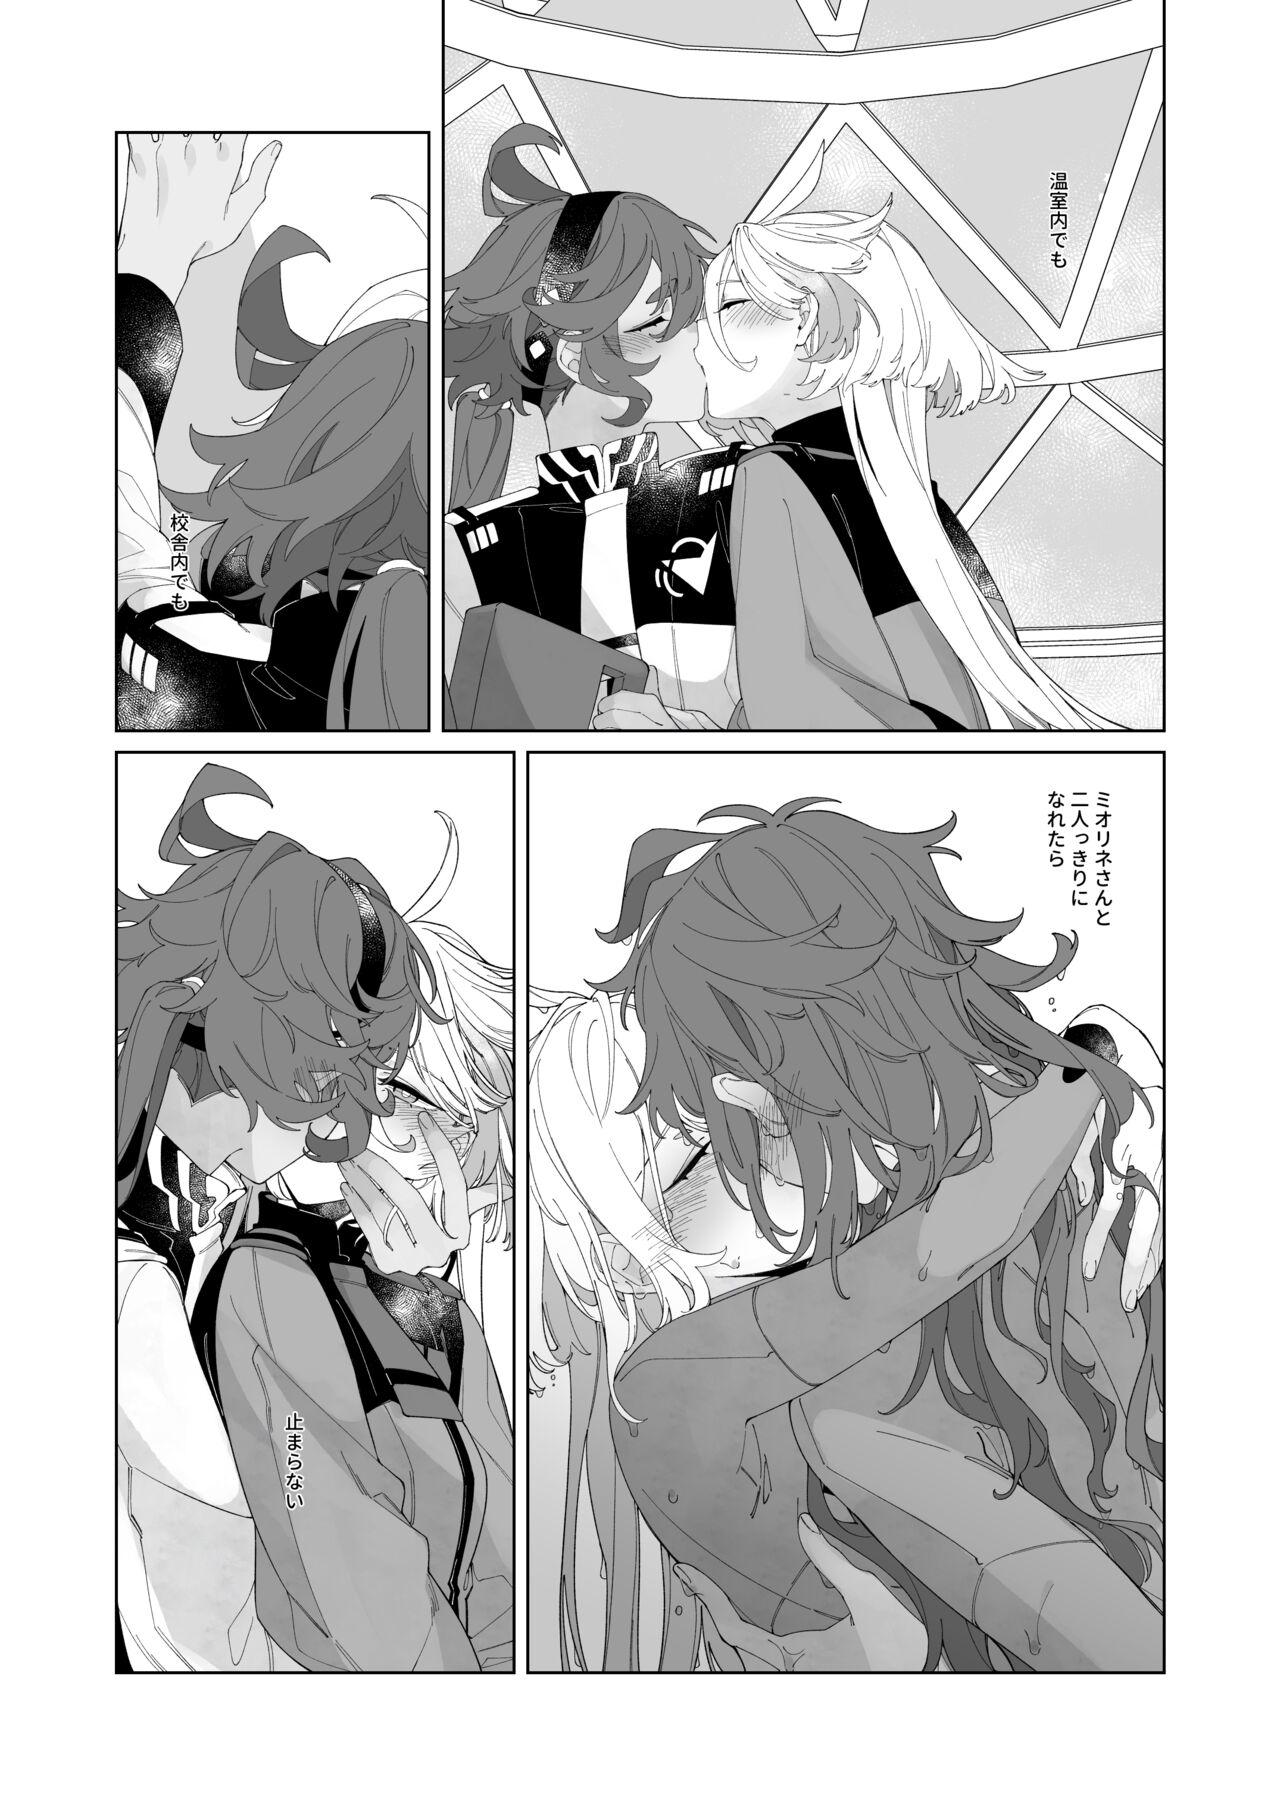 Chica Kiss no Ato Nani ga Shitai? - After kissing, what else do you want to do? - Mobile suit gundam the witch from mercury Backshots - Page 9